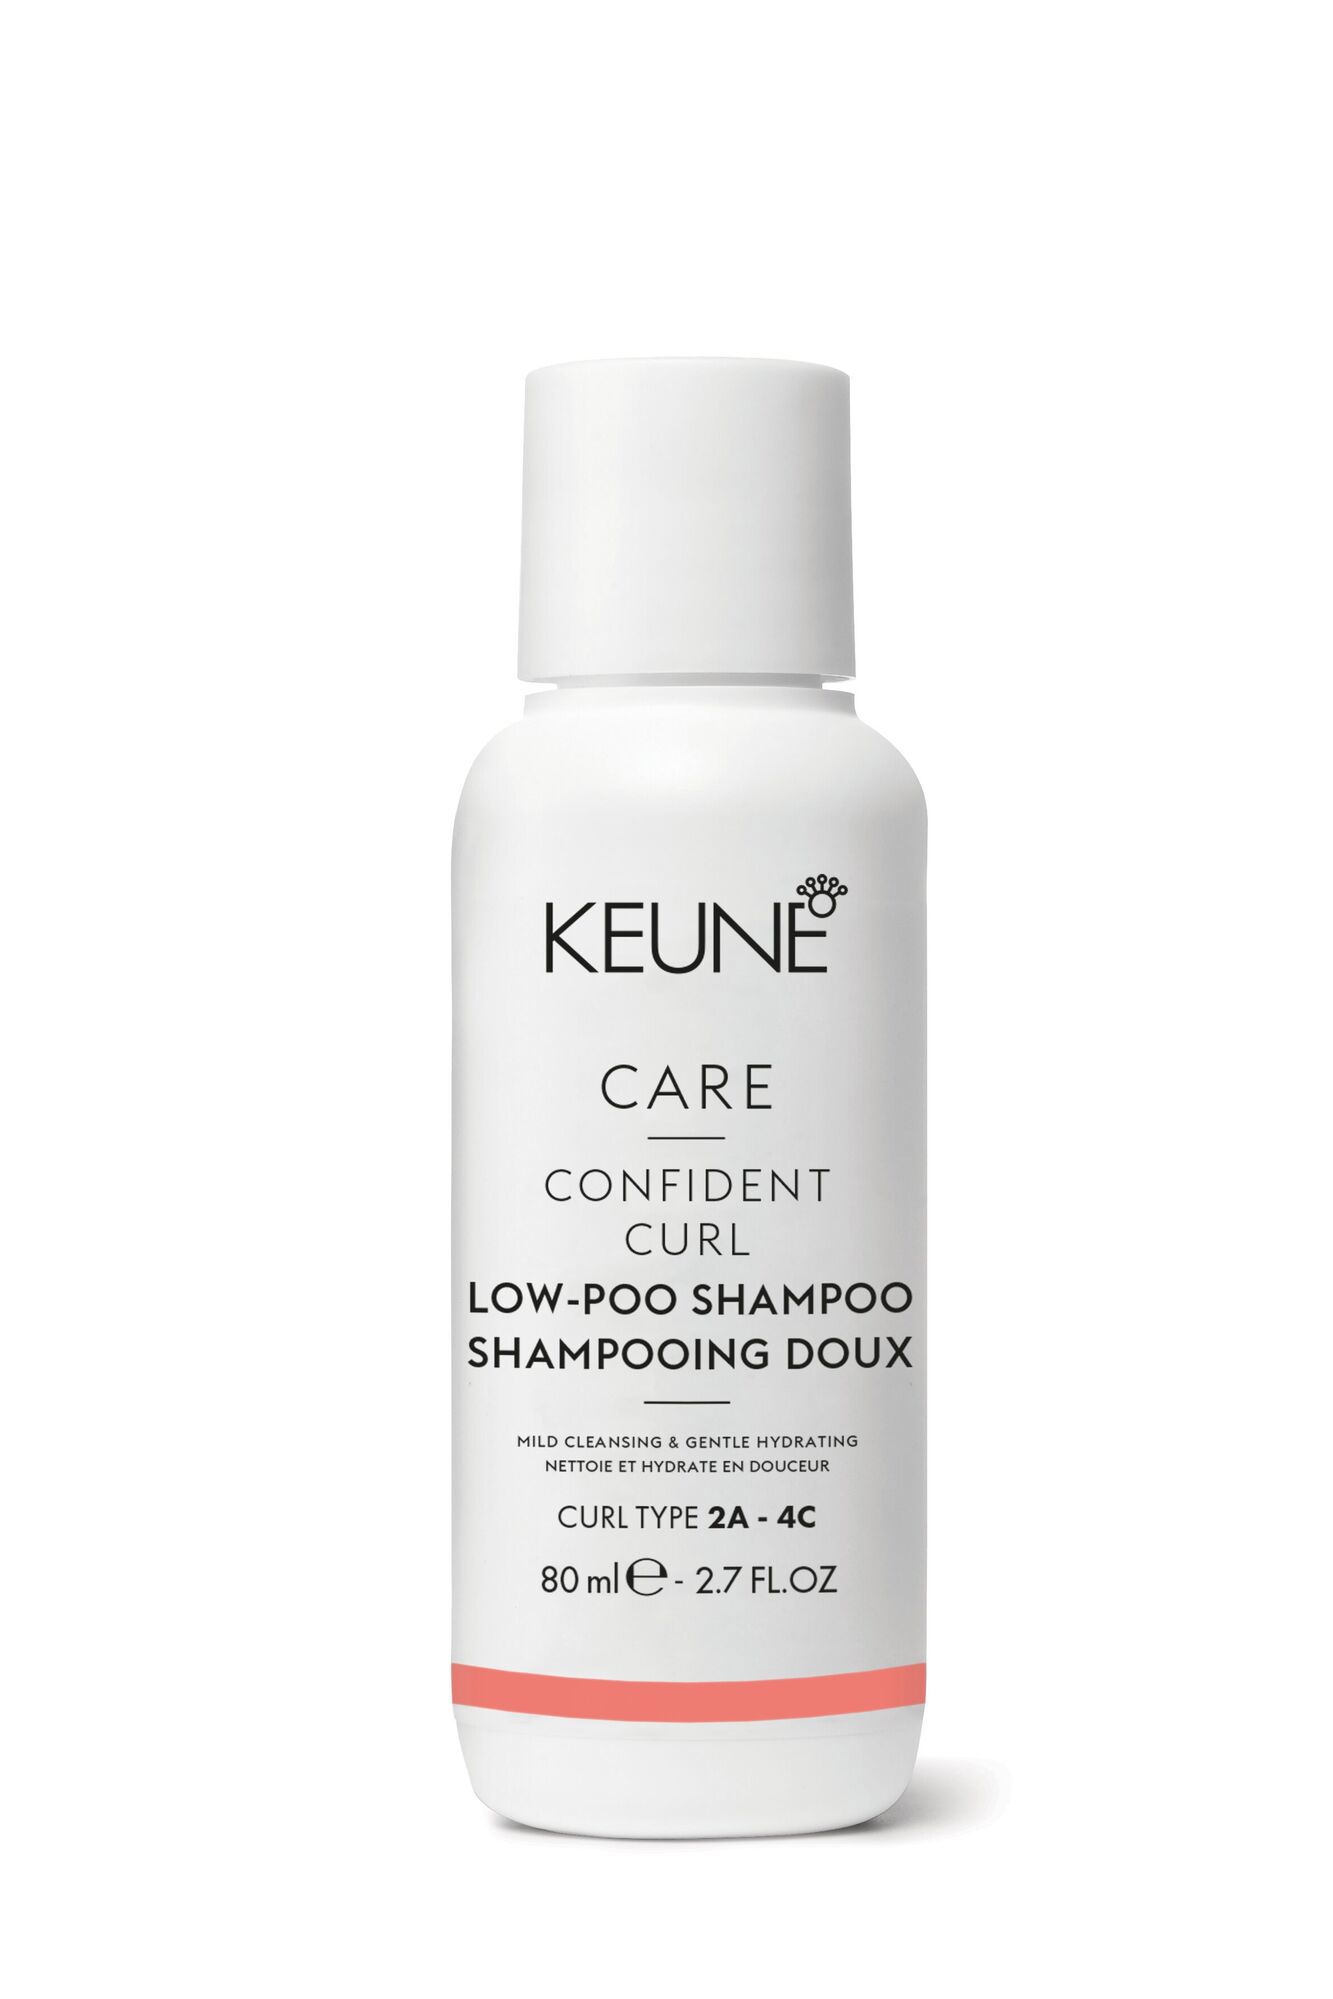 Confident Curl Low-Poo Shampoo on keune.ch: The perfect choice for curly hair. This low-foaming cleanser removes impurities while providing moisturizing fluffy hair.